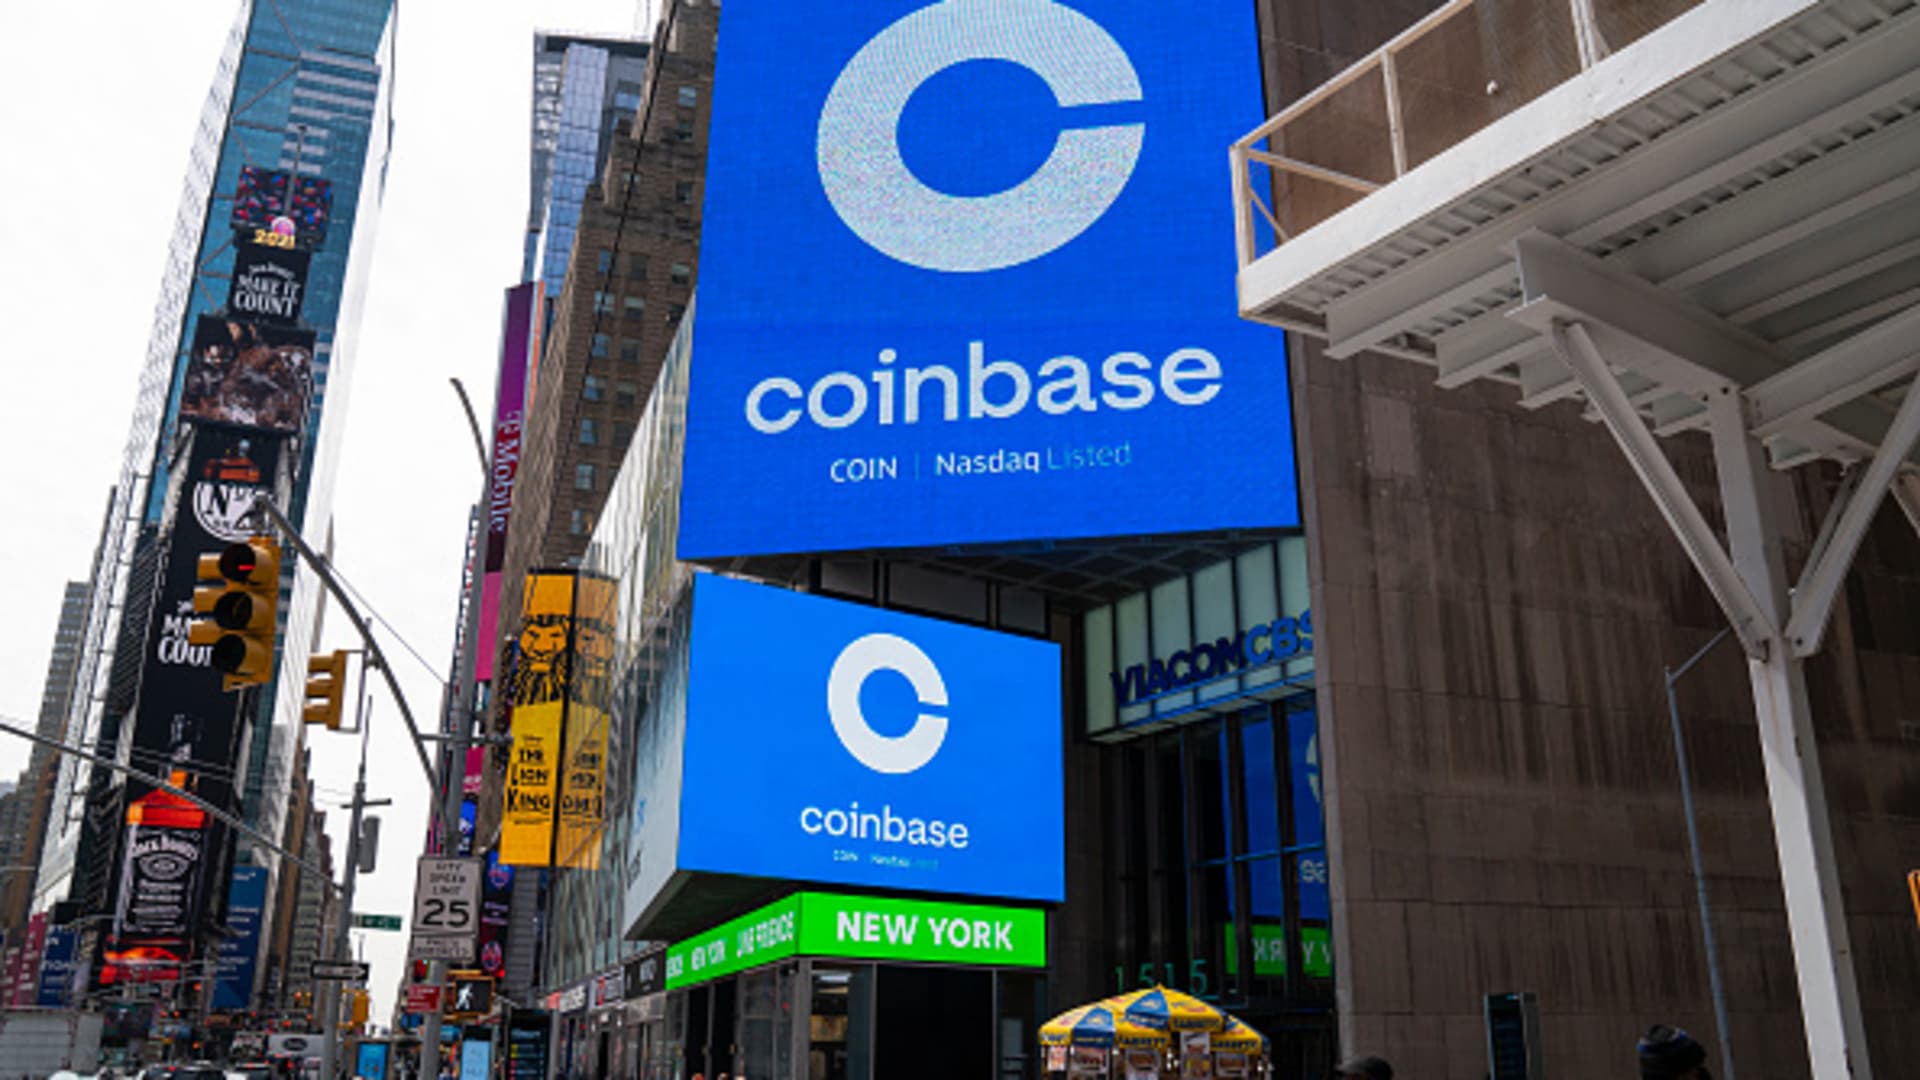 Coinbase blasts SEC over insider trading case